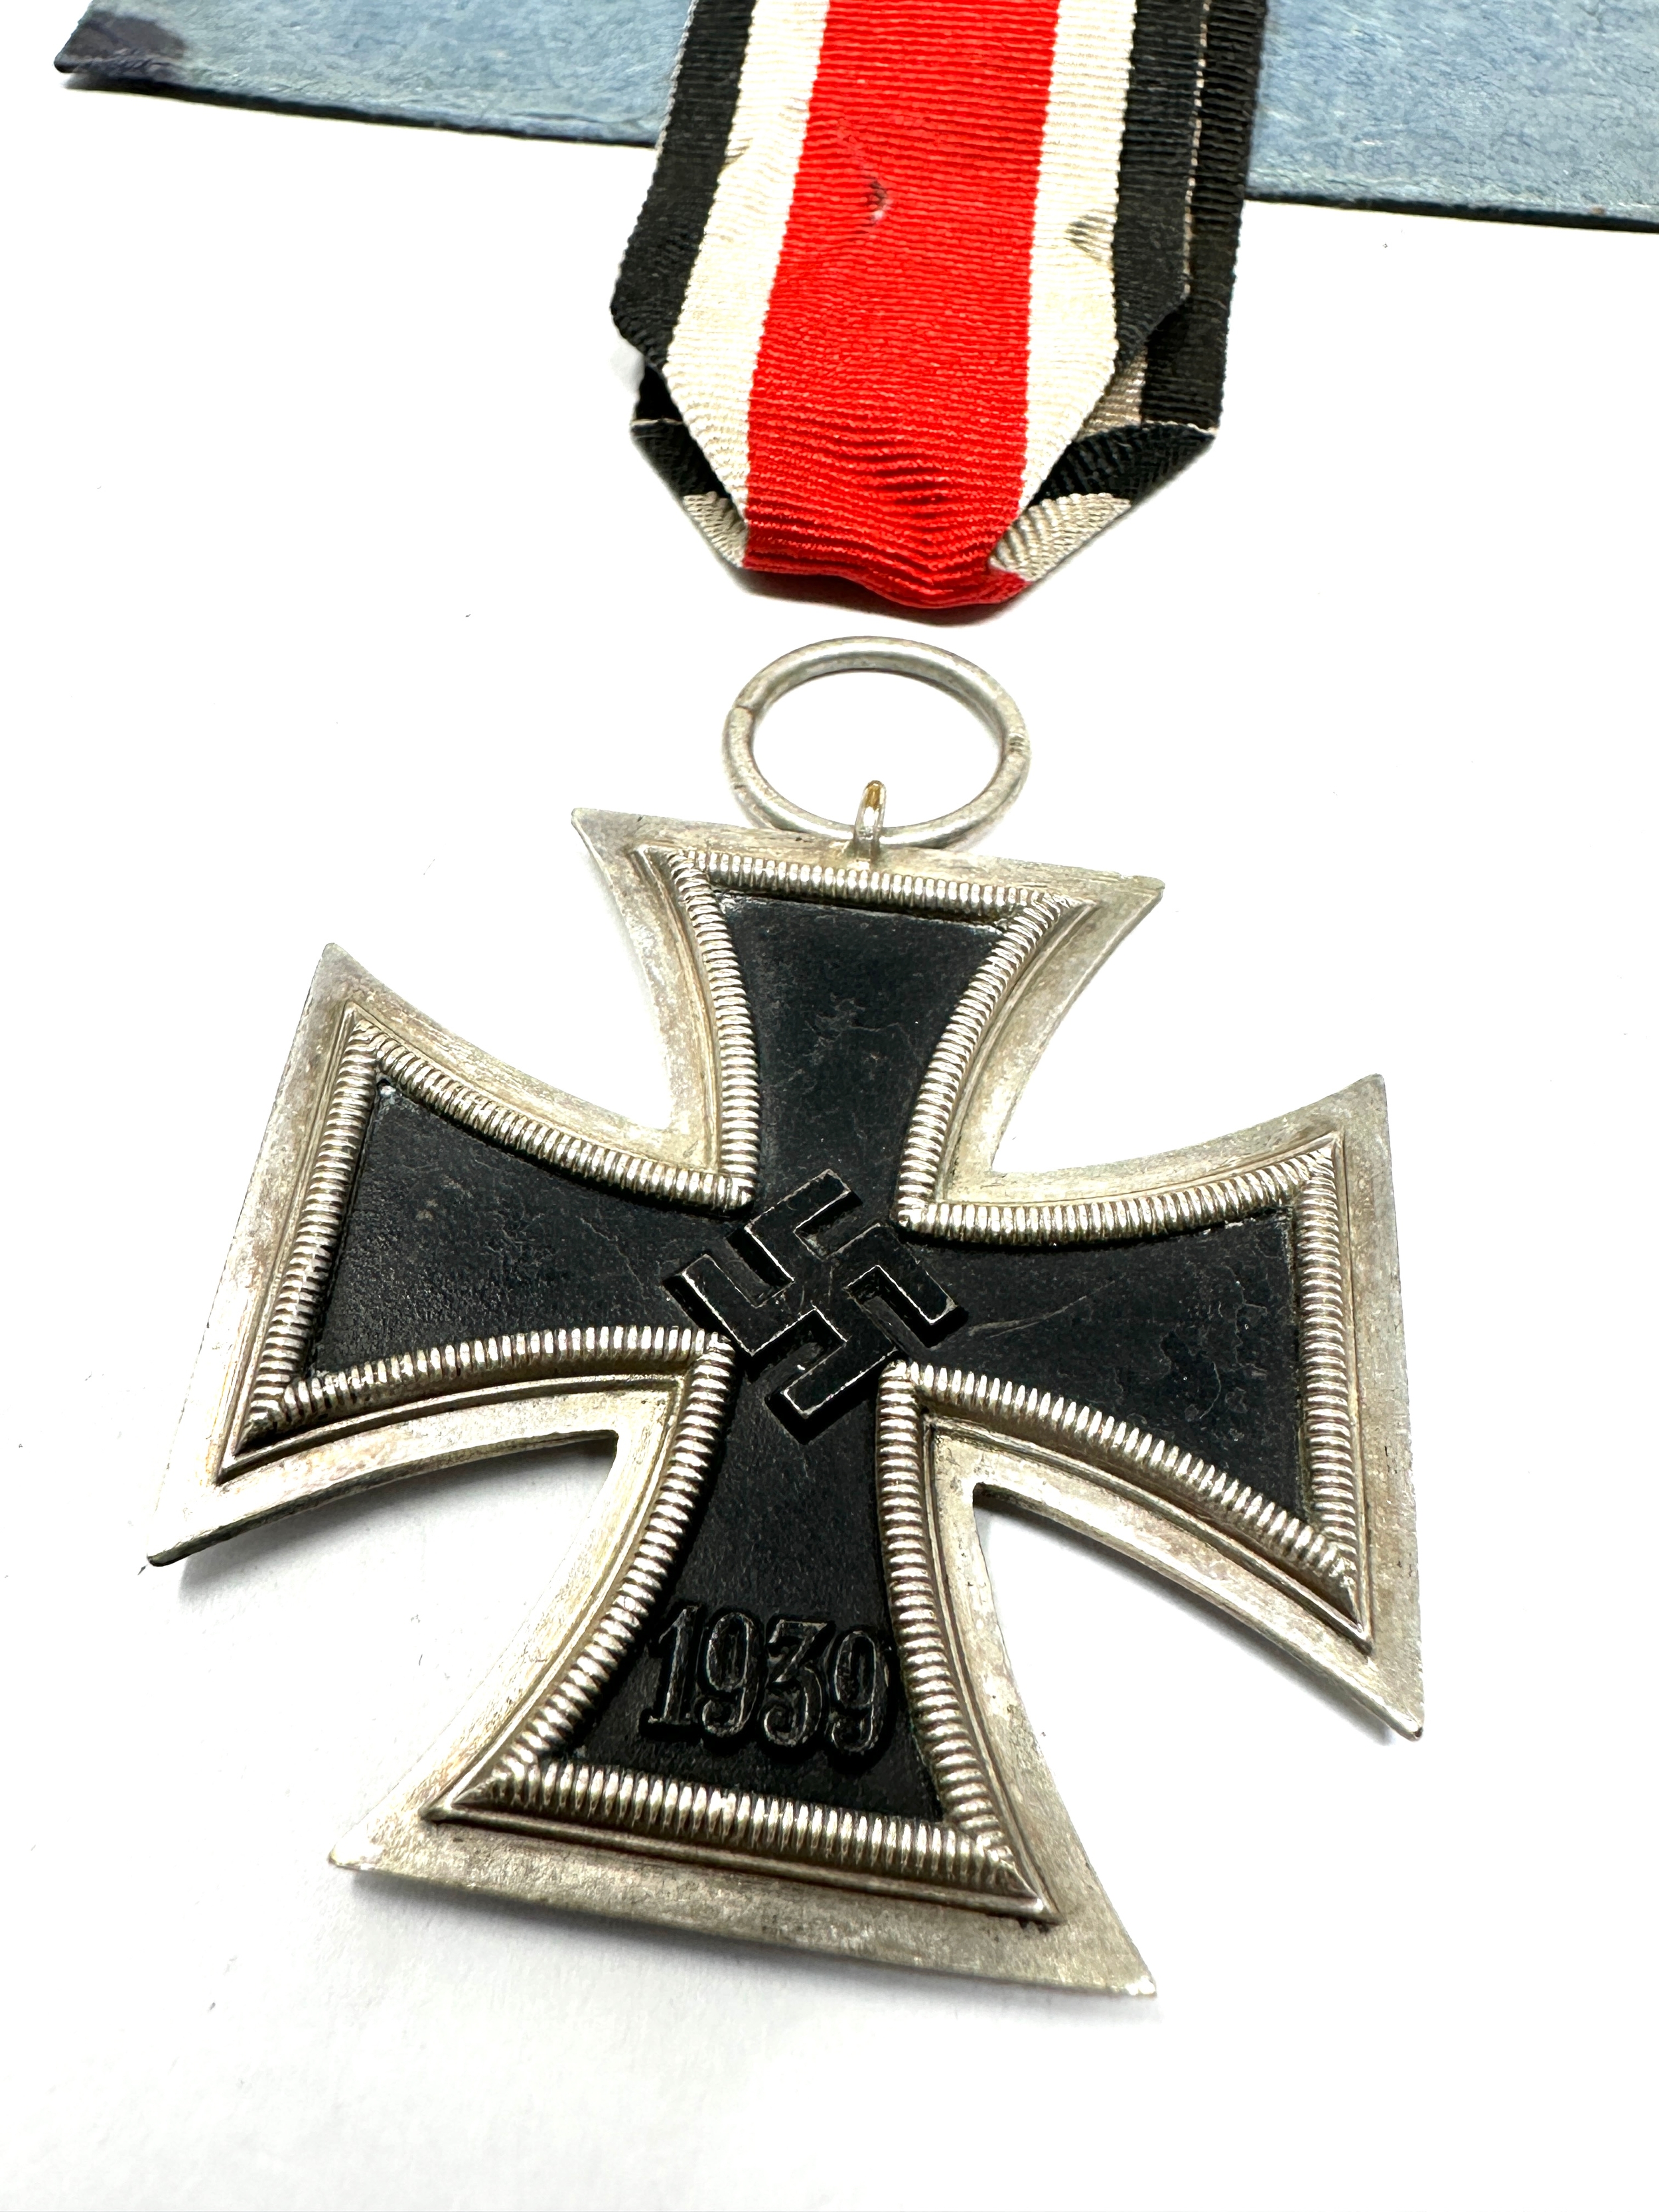 ww2 german iron cross 2nd class & paper packet ring stamp No 4 - Image 2 of 3